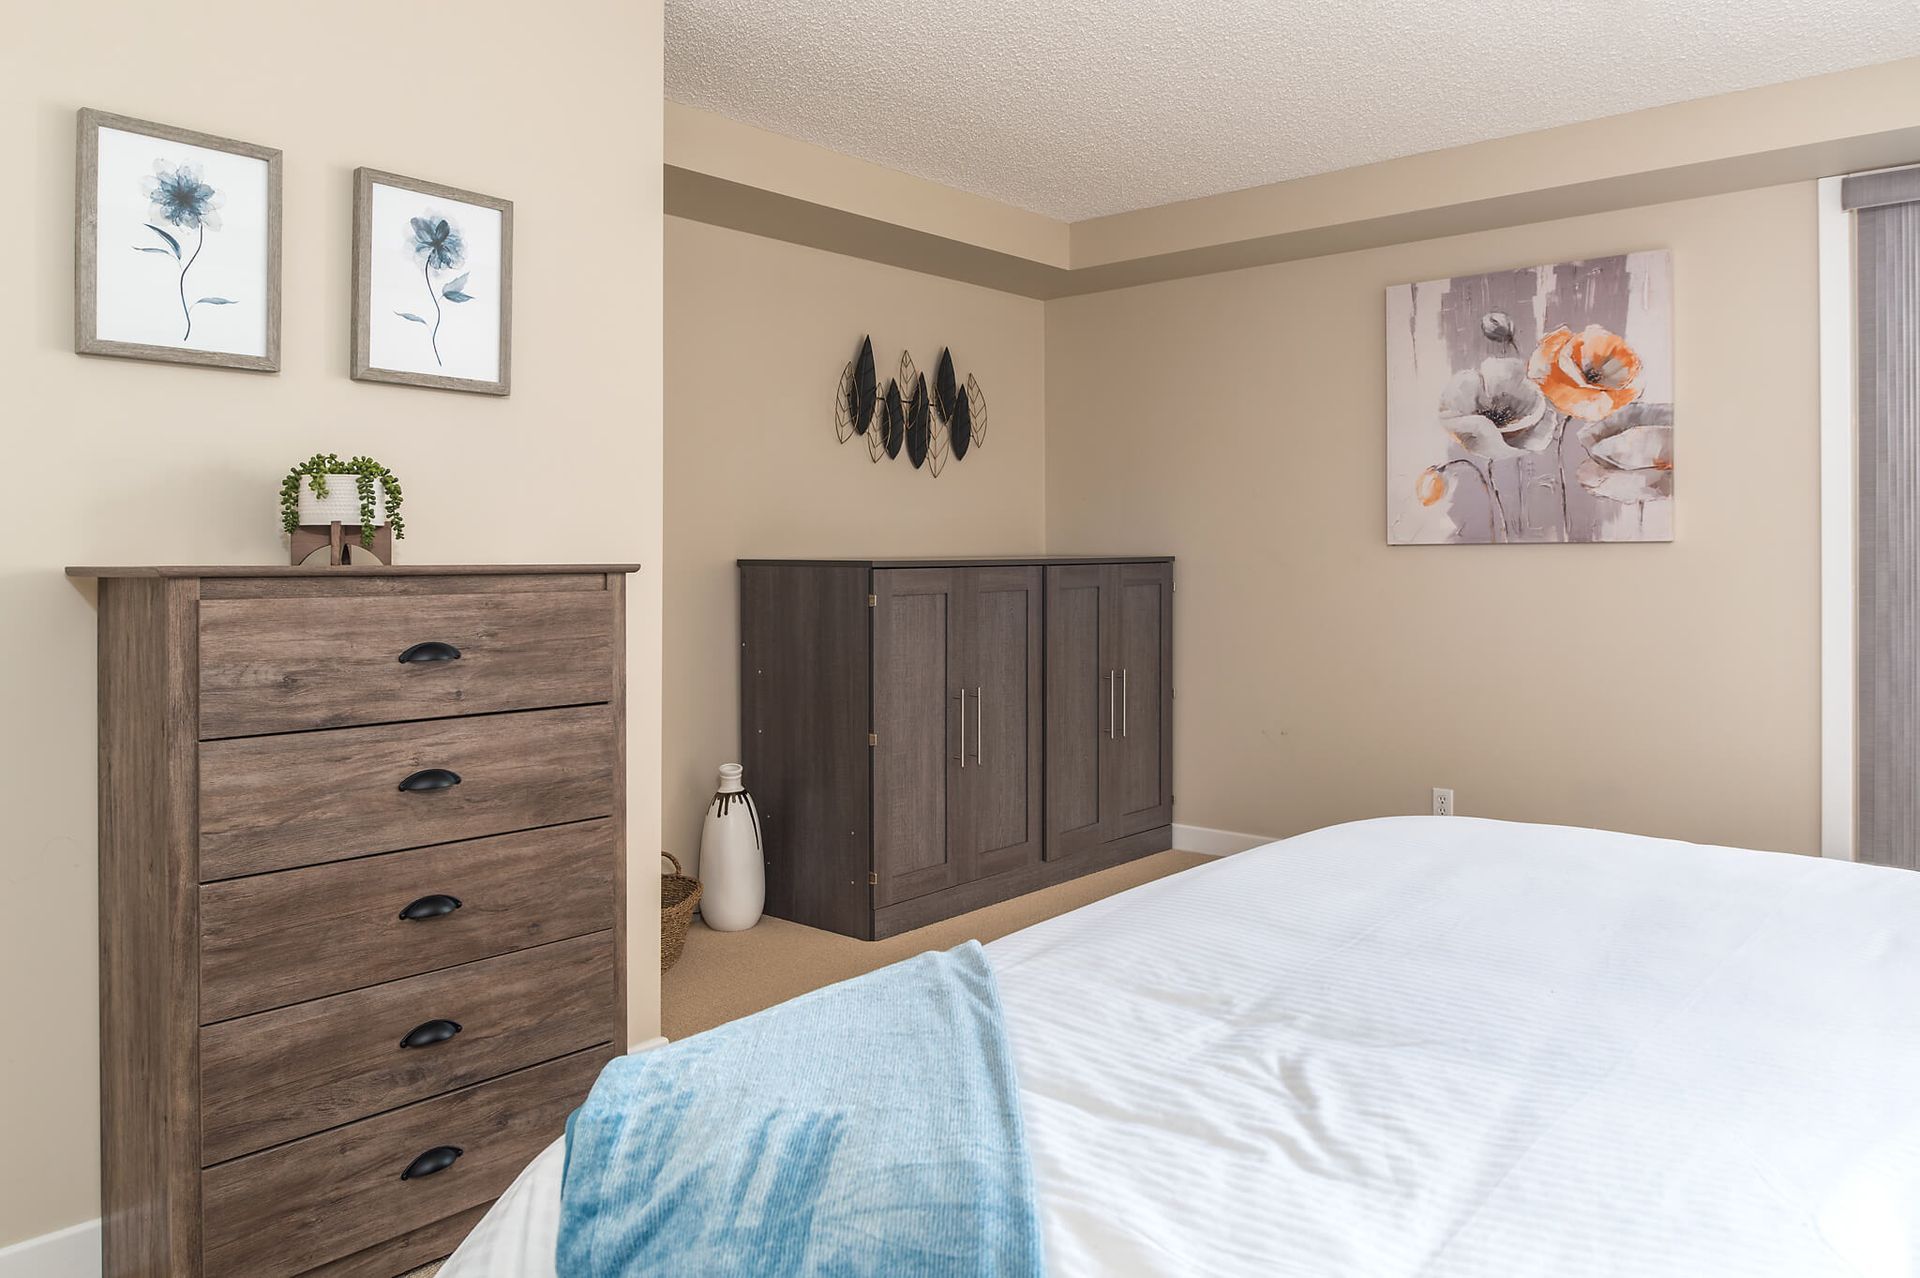 Cabinet bed at the Lakefront condo at Lake Windermere Pointe BC Vacation Rental hosted by Aisling Baile Property Management.